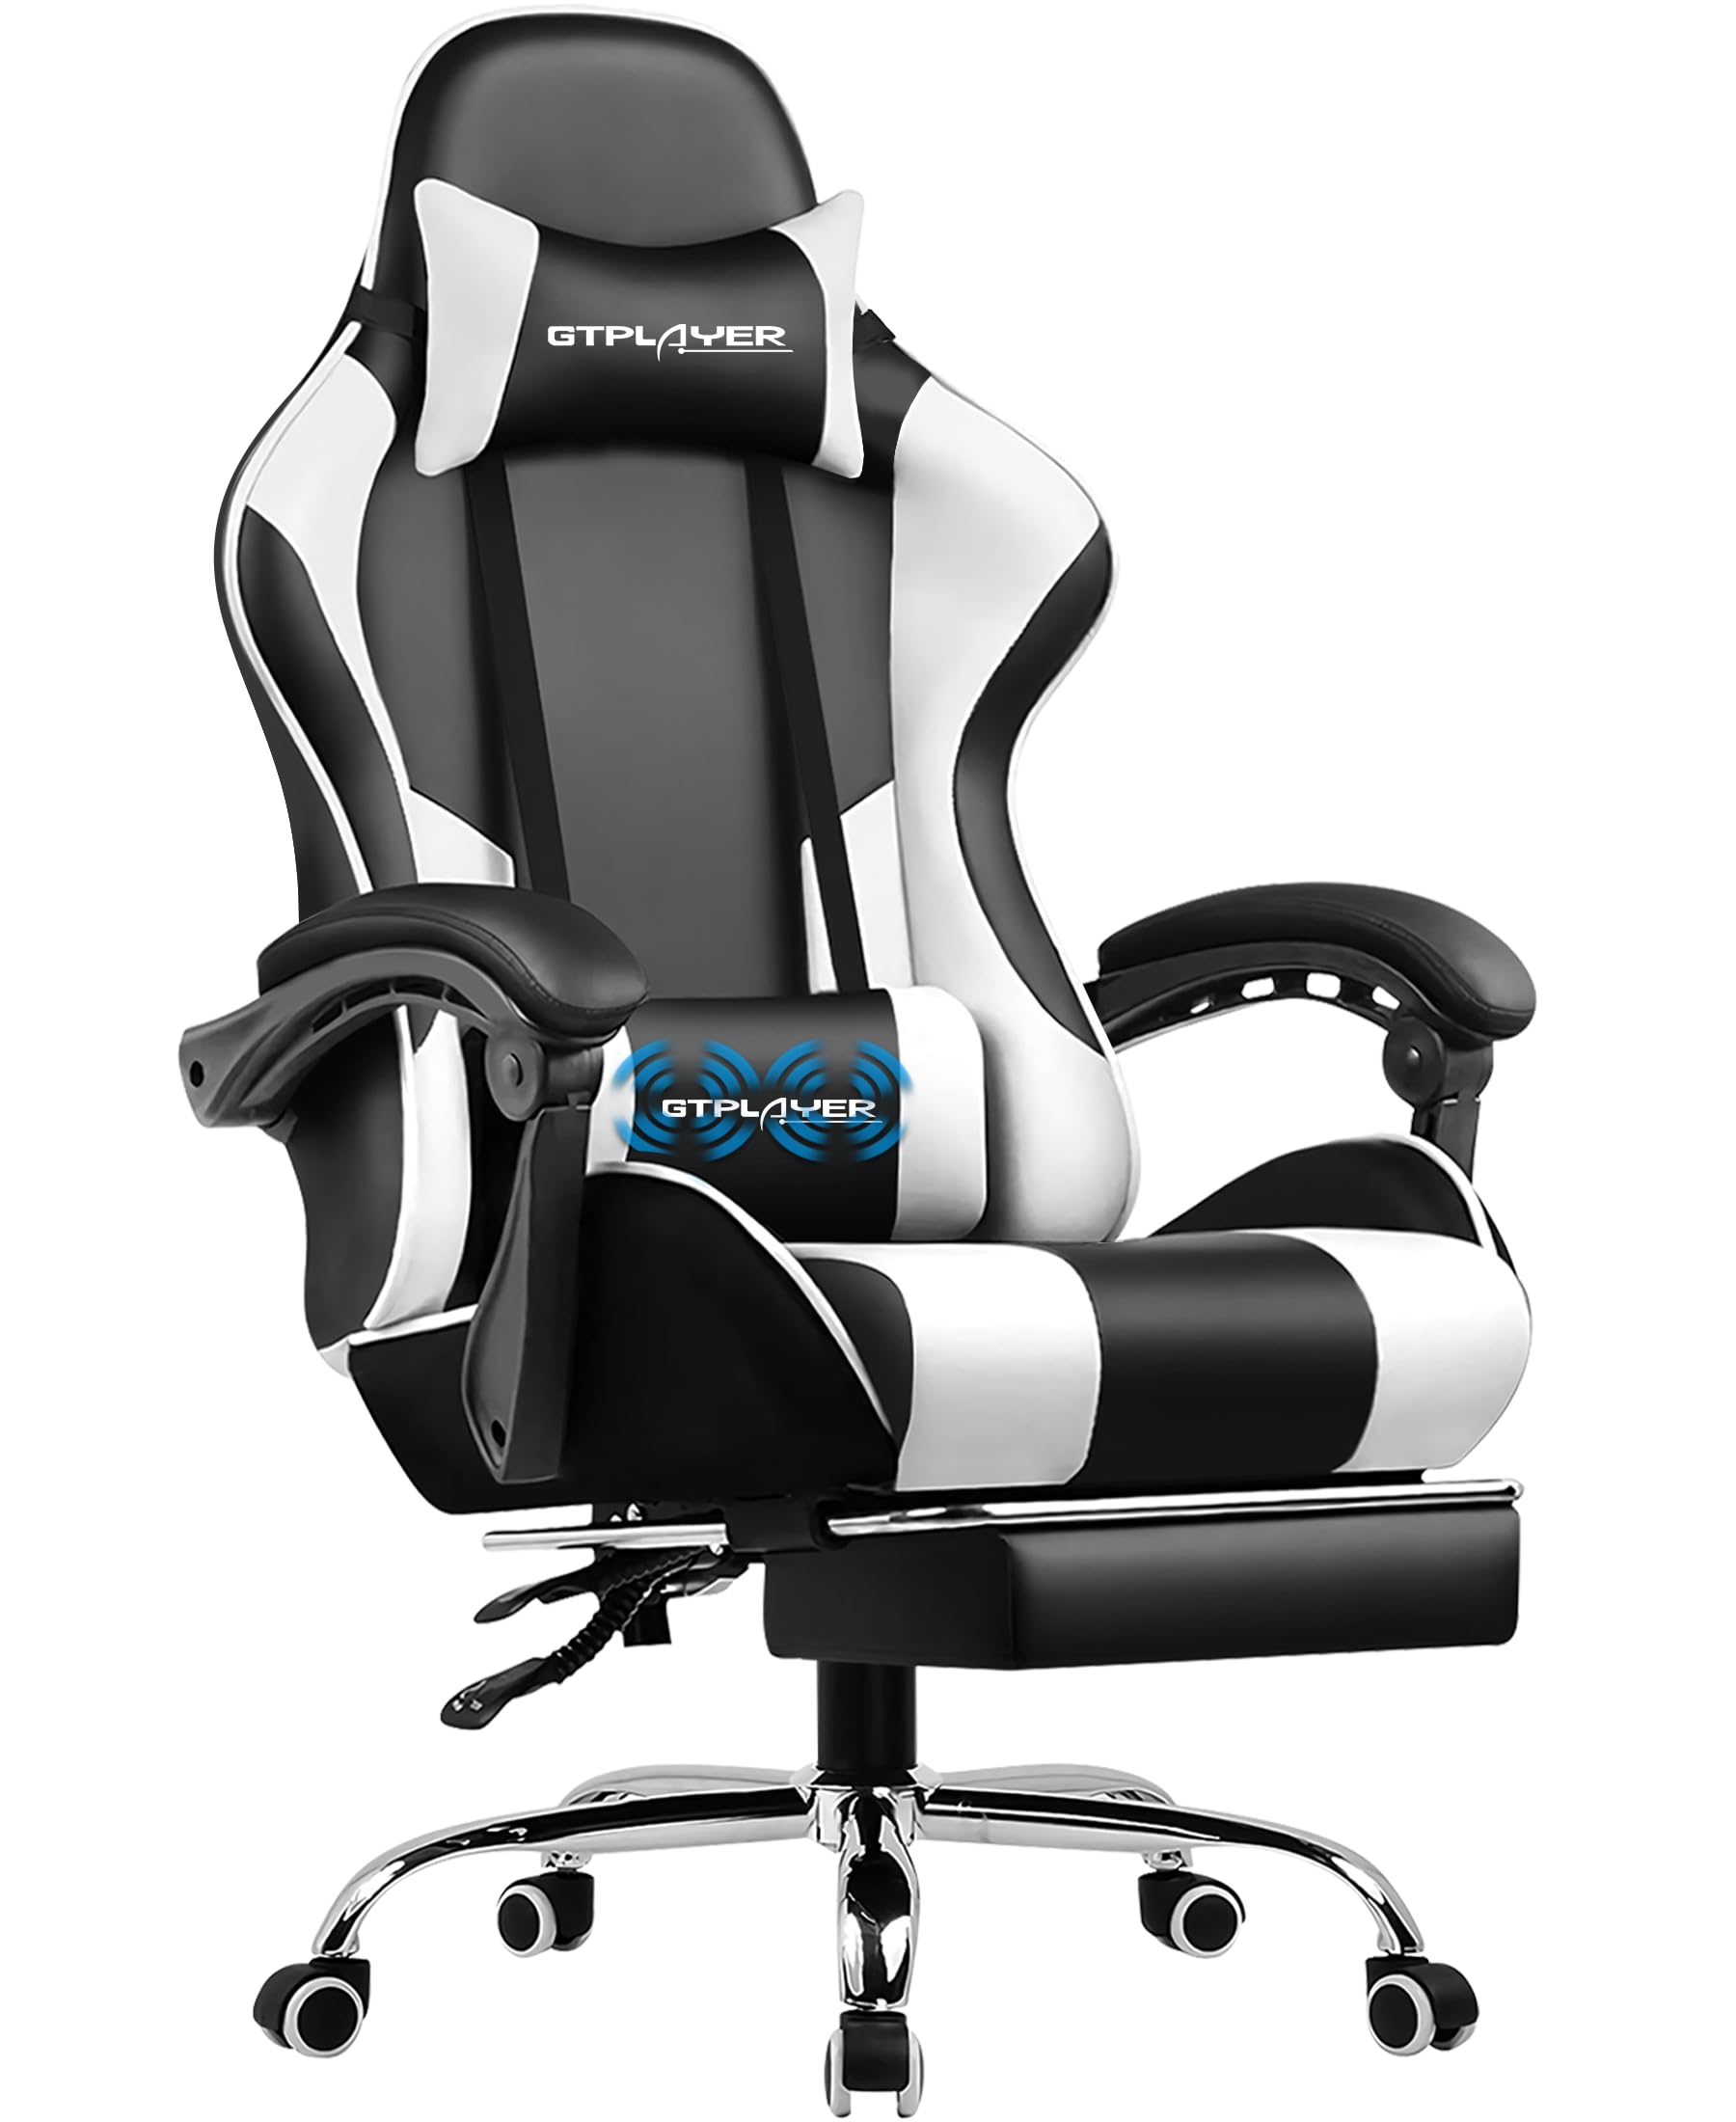 GTPLAYER Gaming Chair, Computer Chair with Footrest and Lumbar Support for $49.4